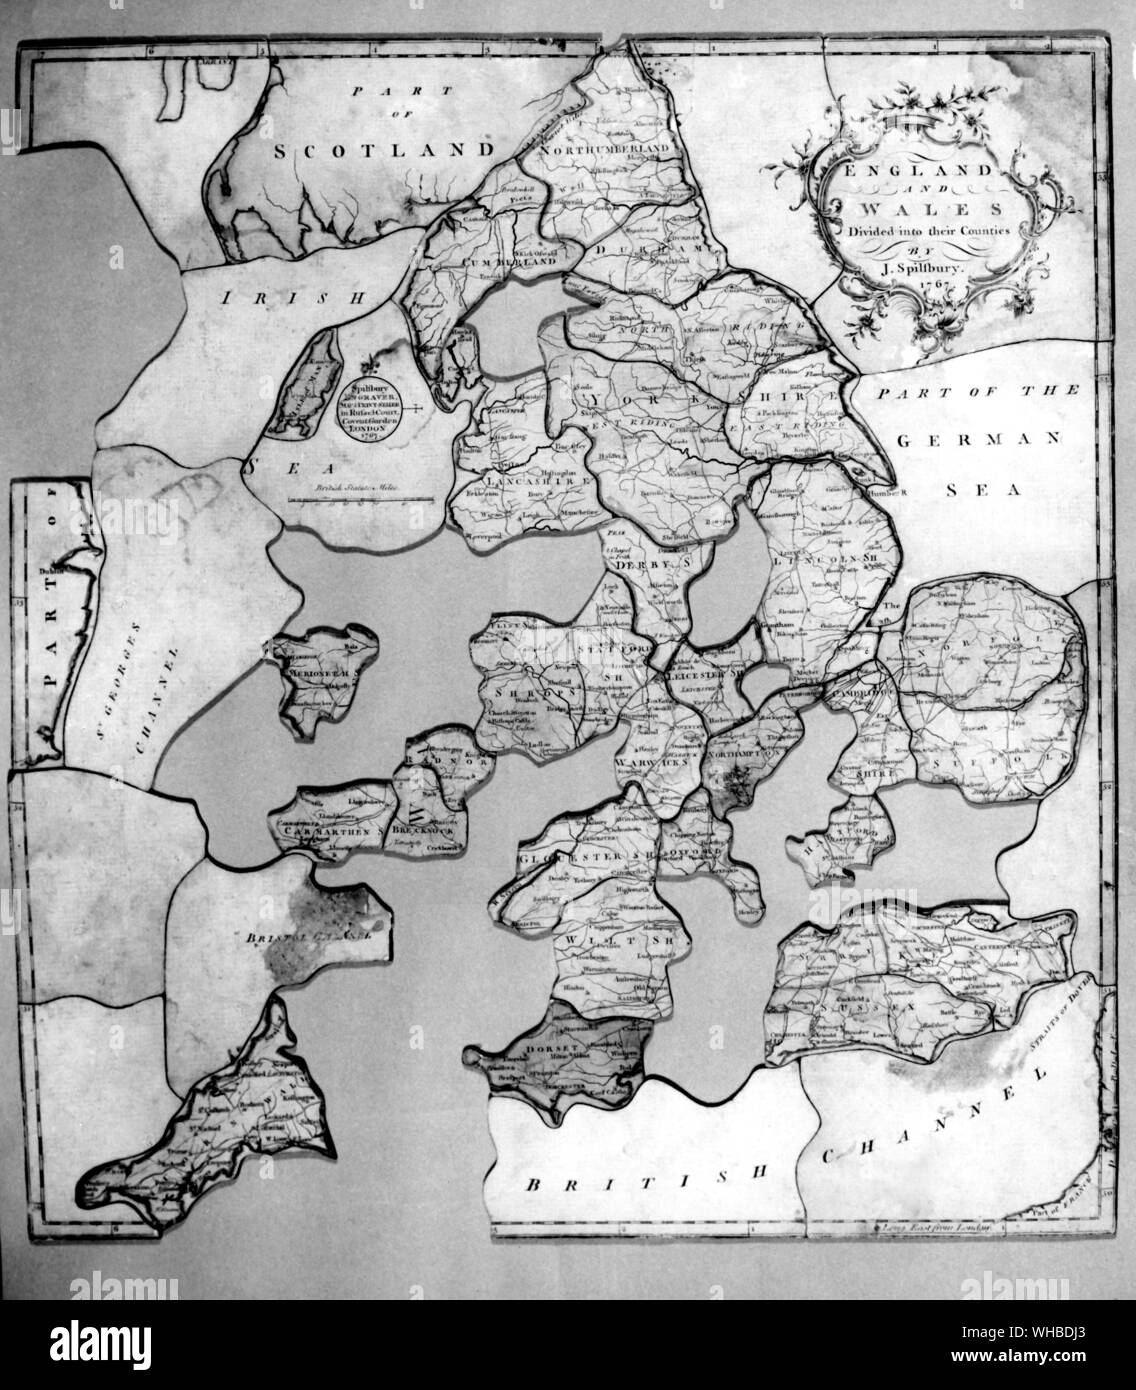 The earliest dated jigsaw puzzle - J. Spilsbury's dissected map of England and Wales, 1767.. Stock Photo